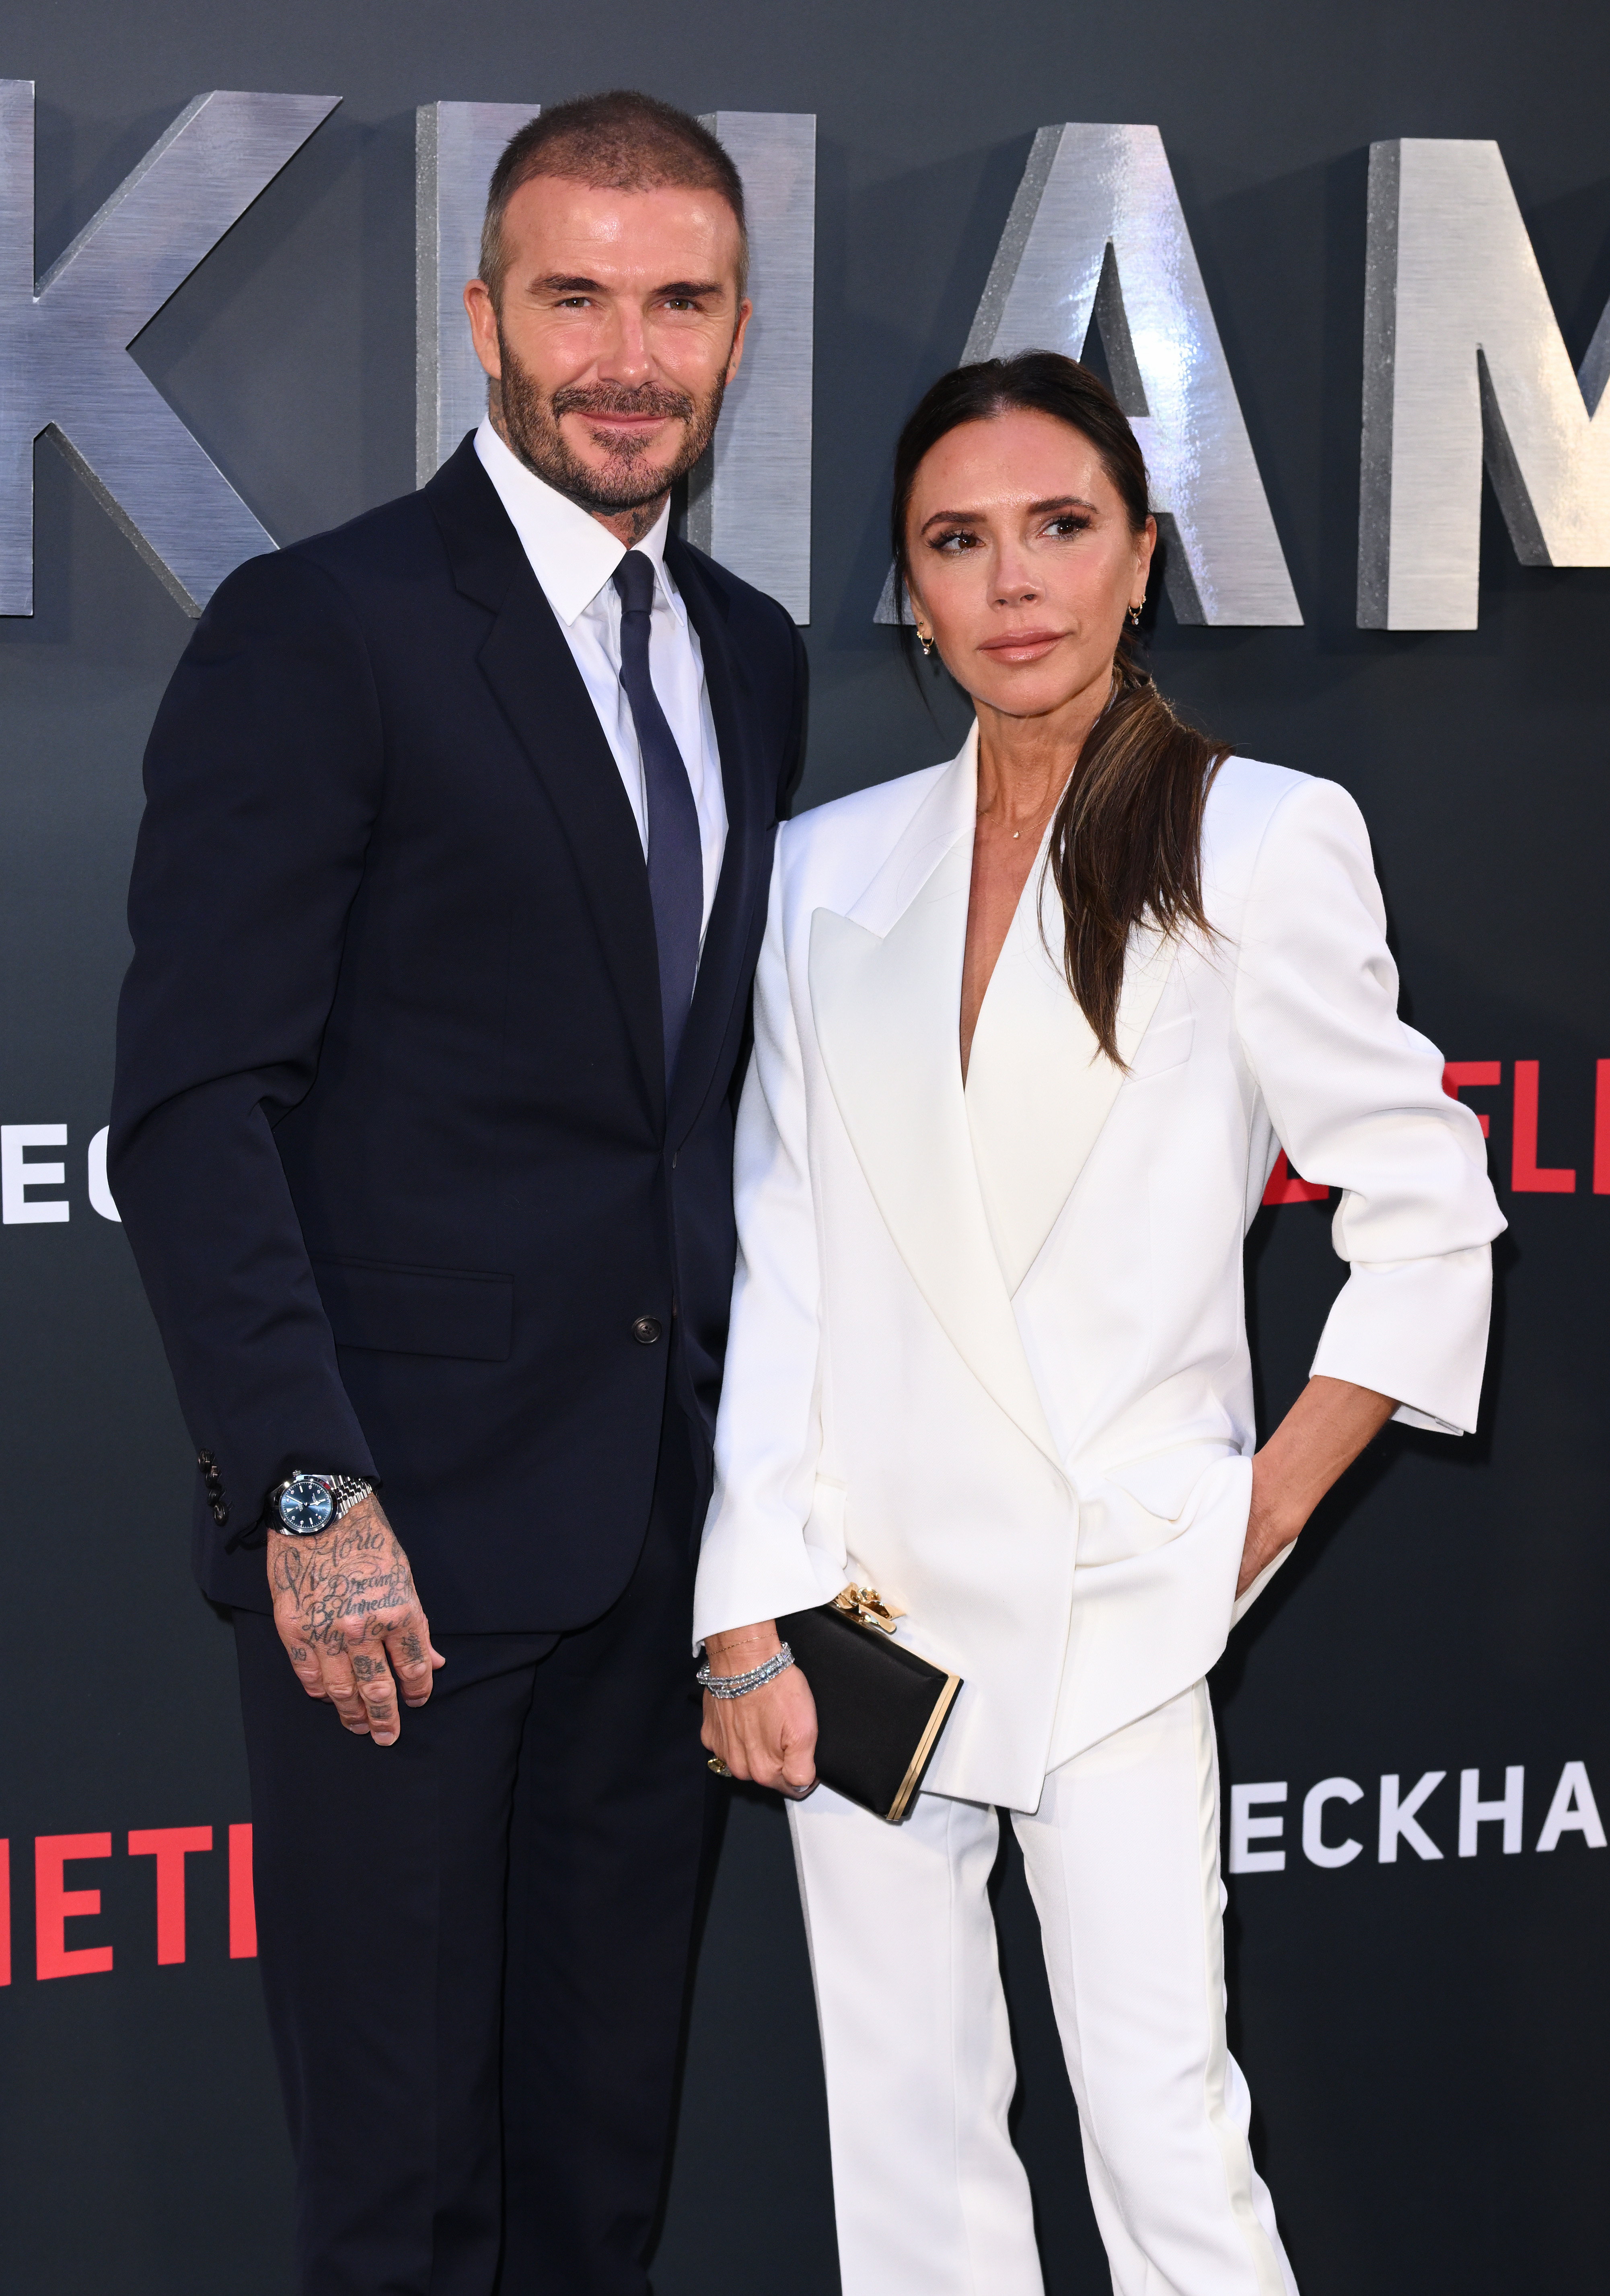 David & Victoria Beckham Make Rare Family Appearance With Four Children